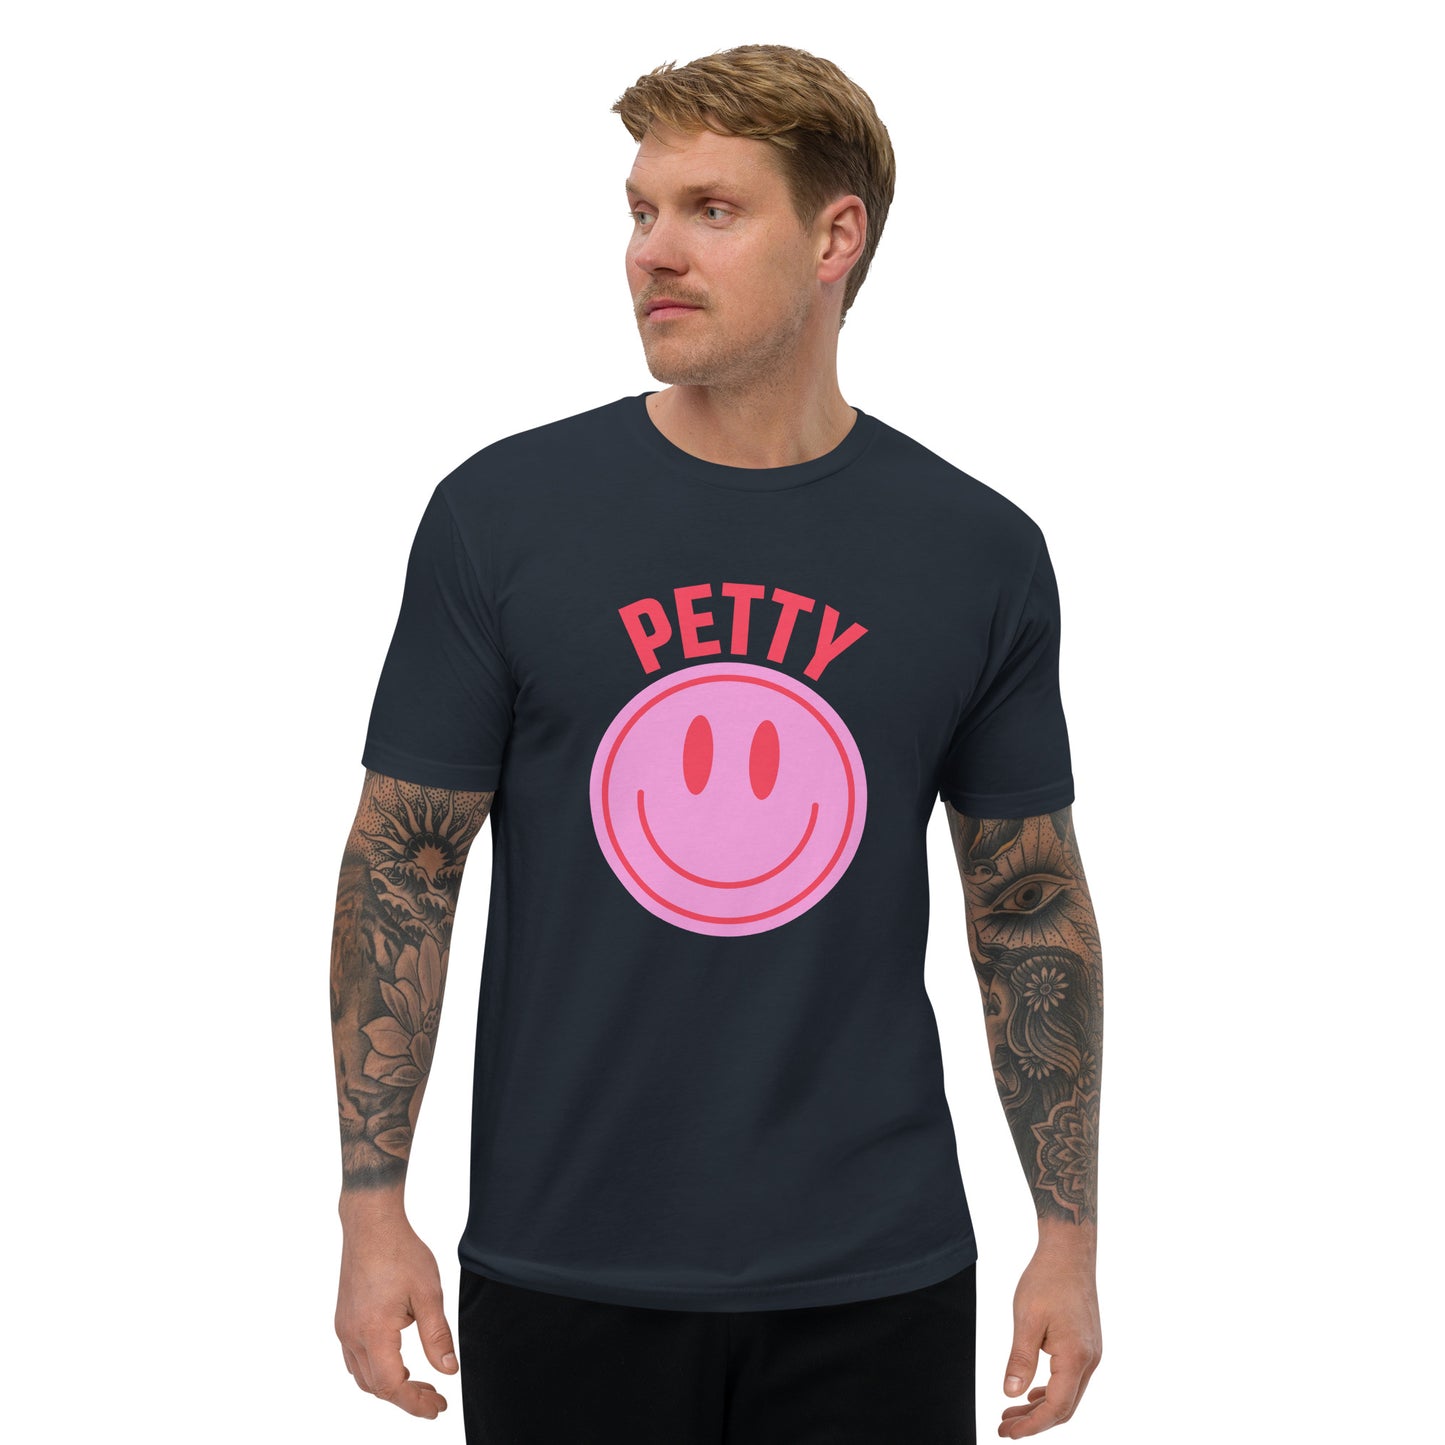 Petty | Fitted T-Shirt